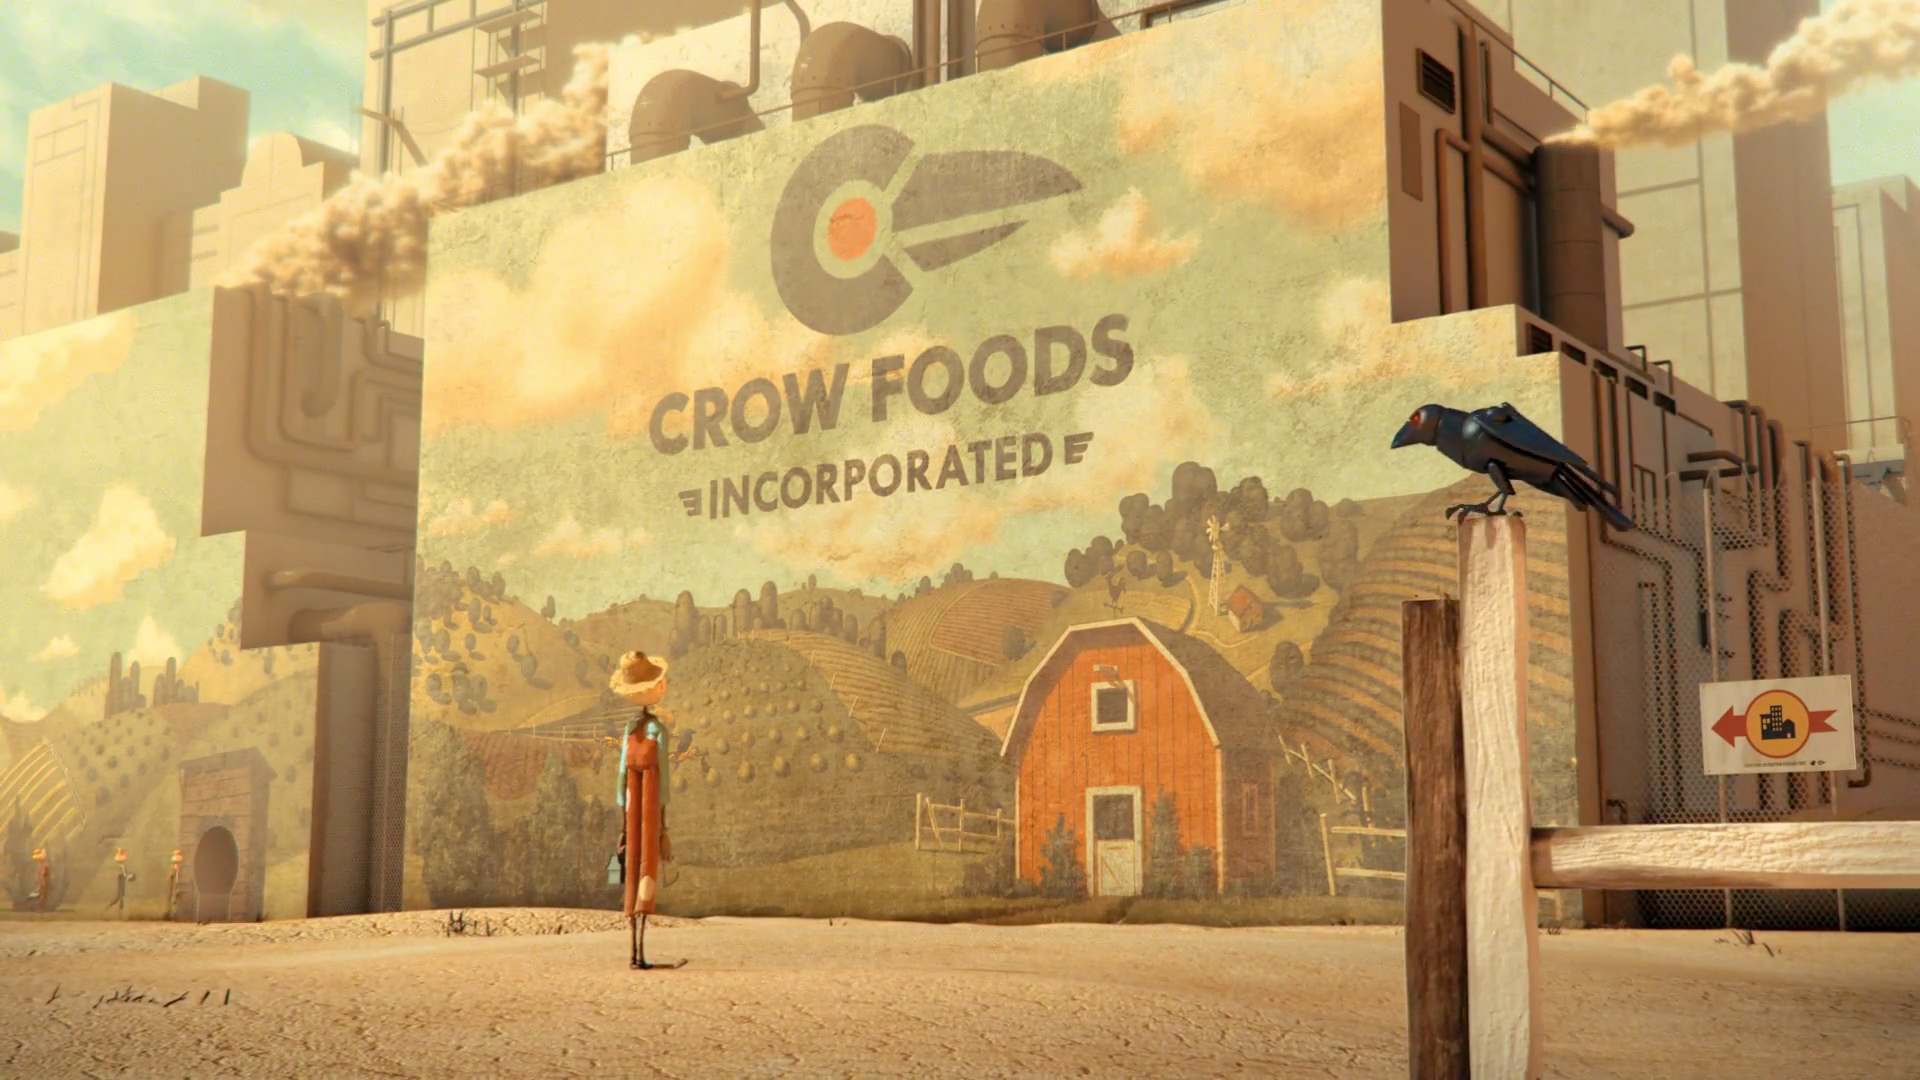 chipotle-creates-great-animated-short-film-the-scarecrow-1.jpg